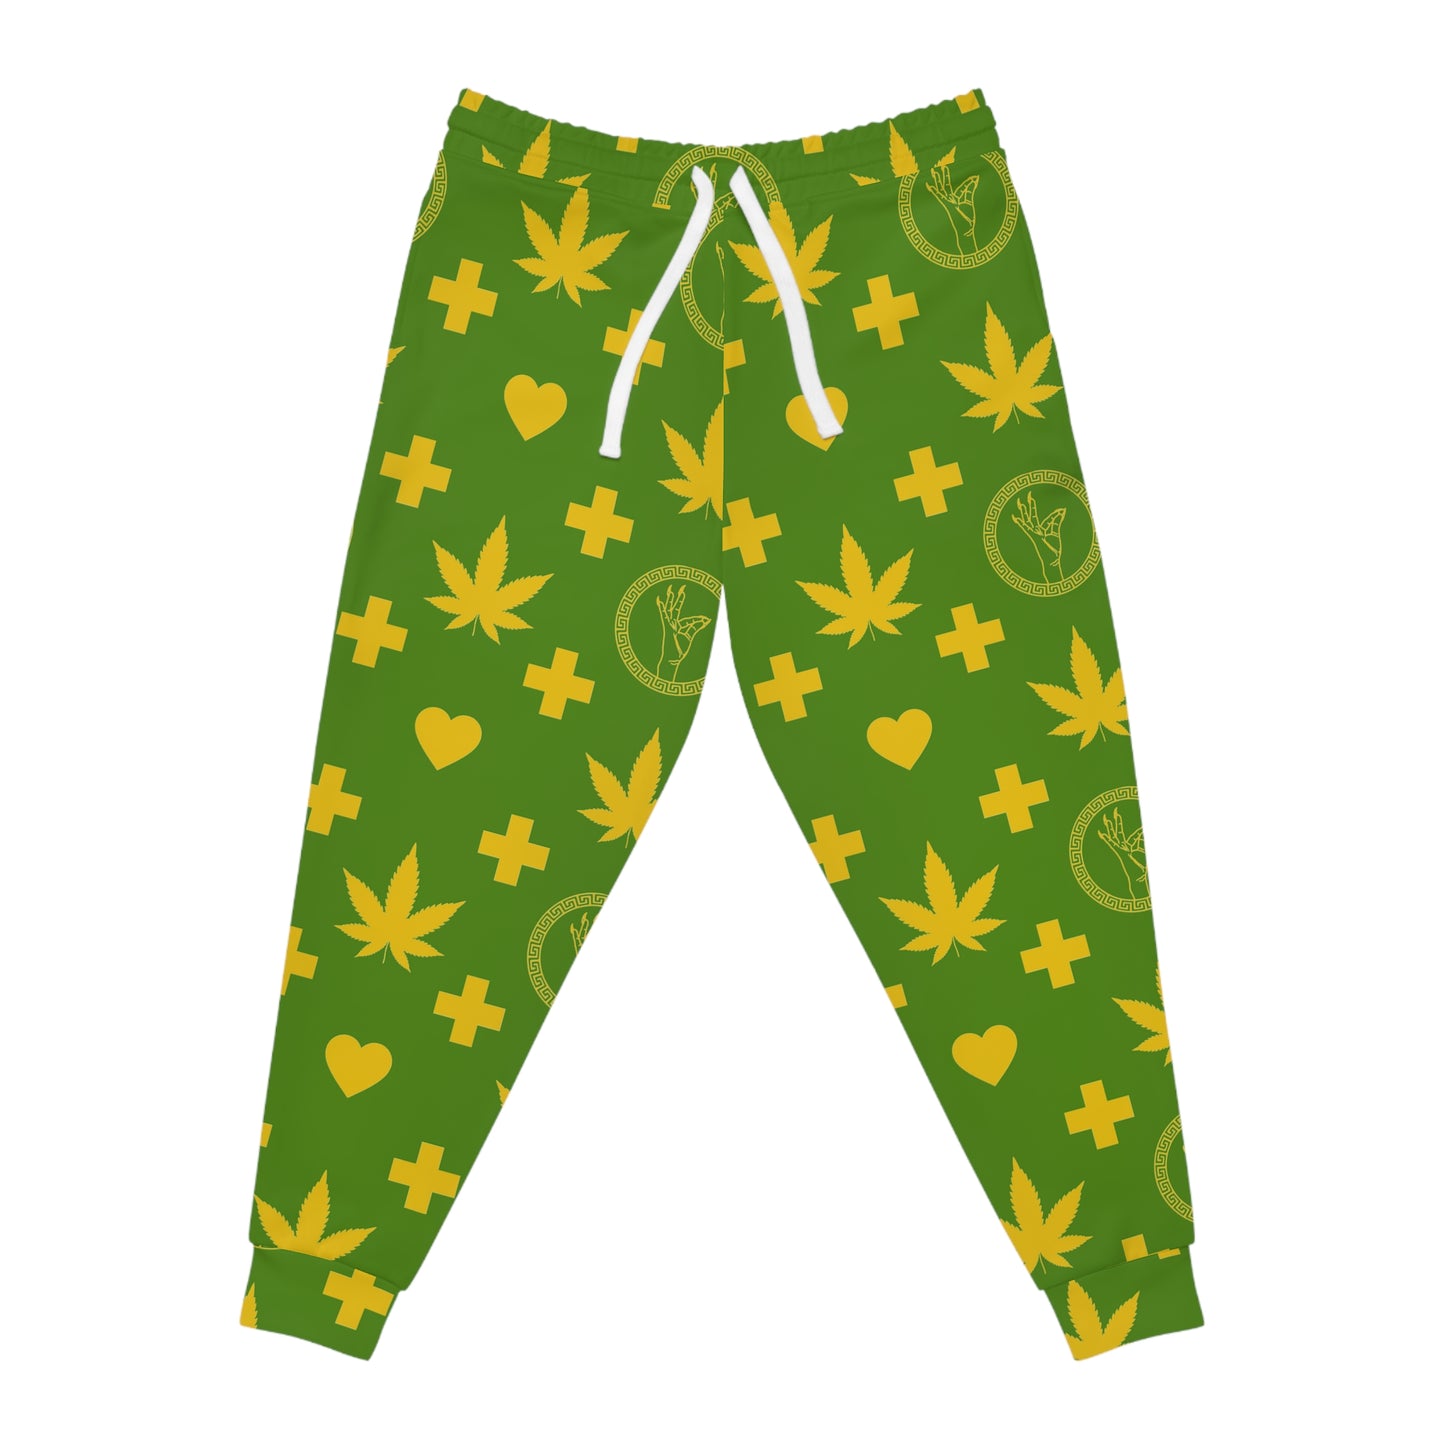 "Medallion Herb Couture” Joggers